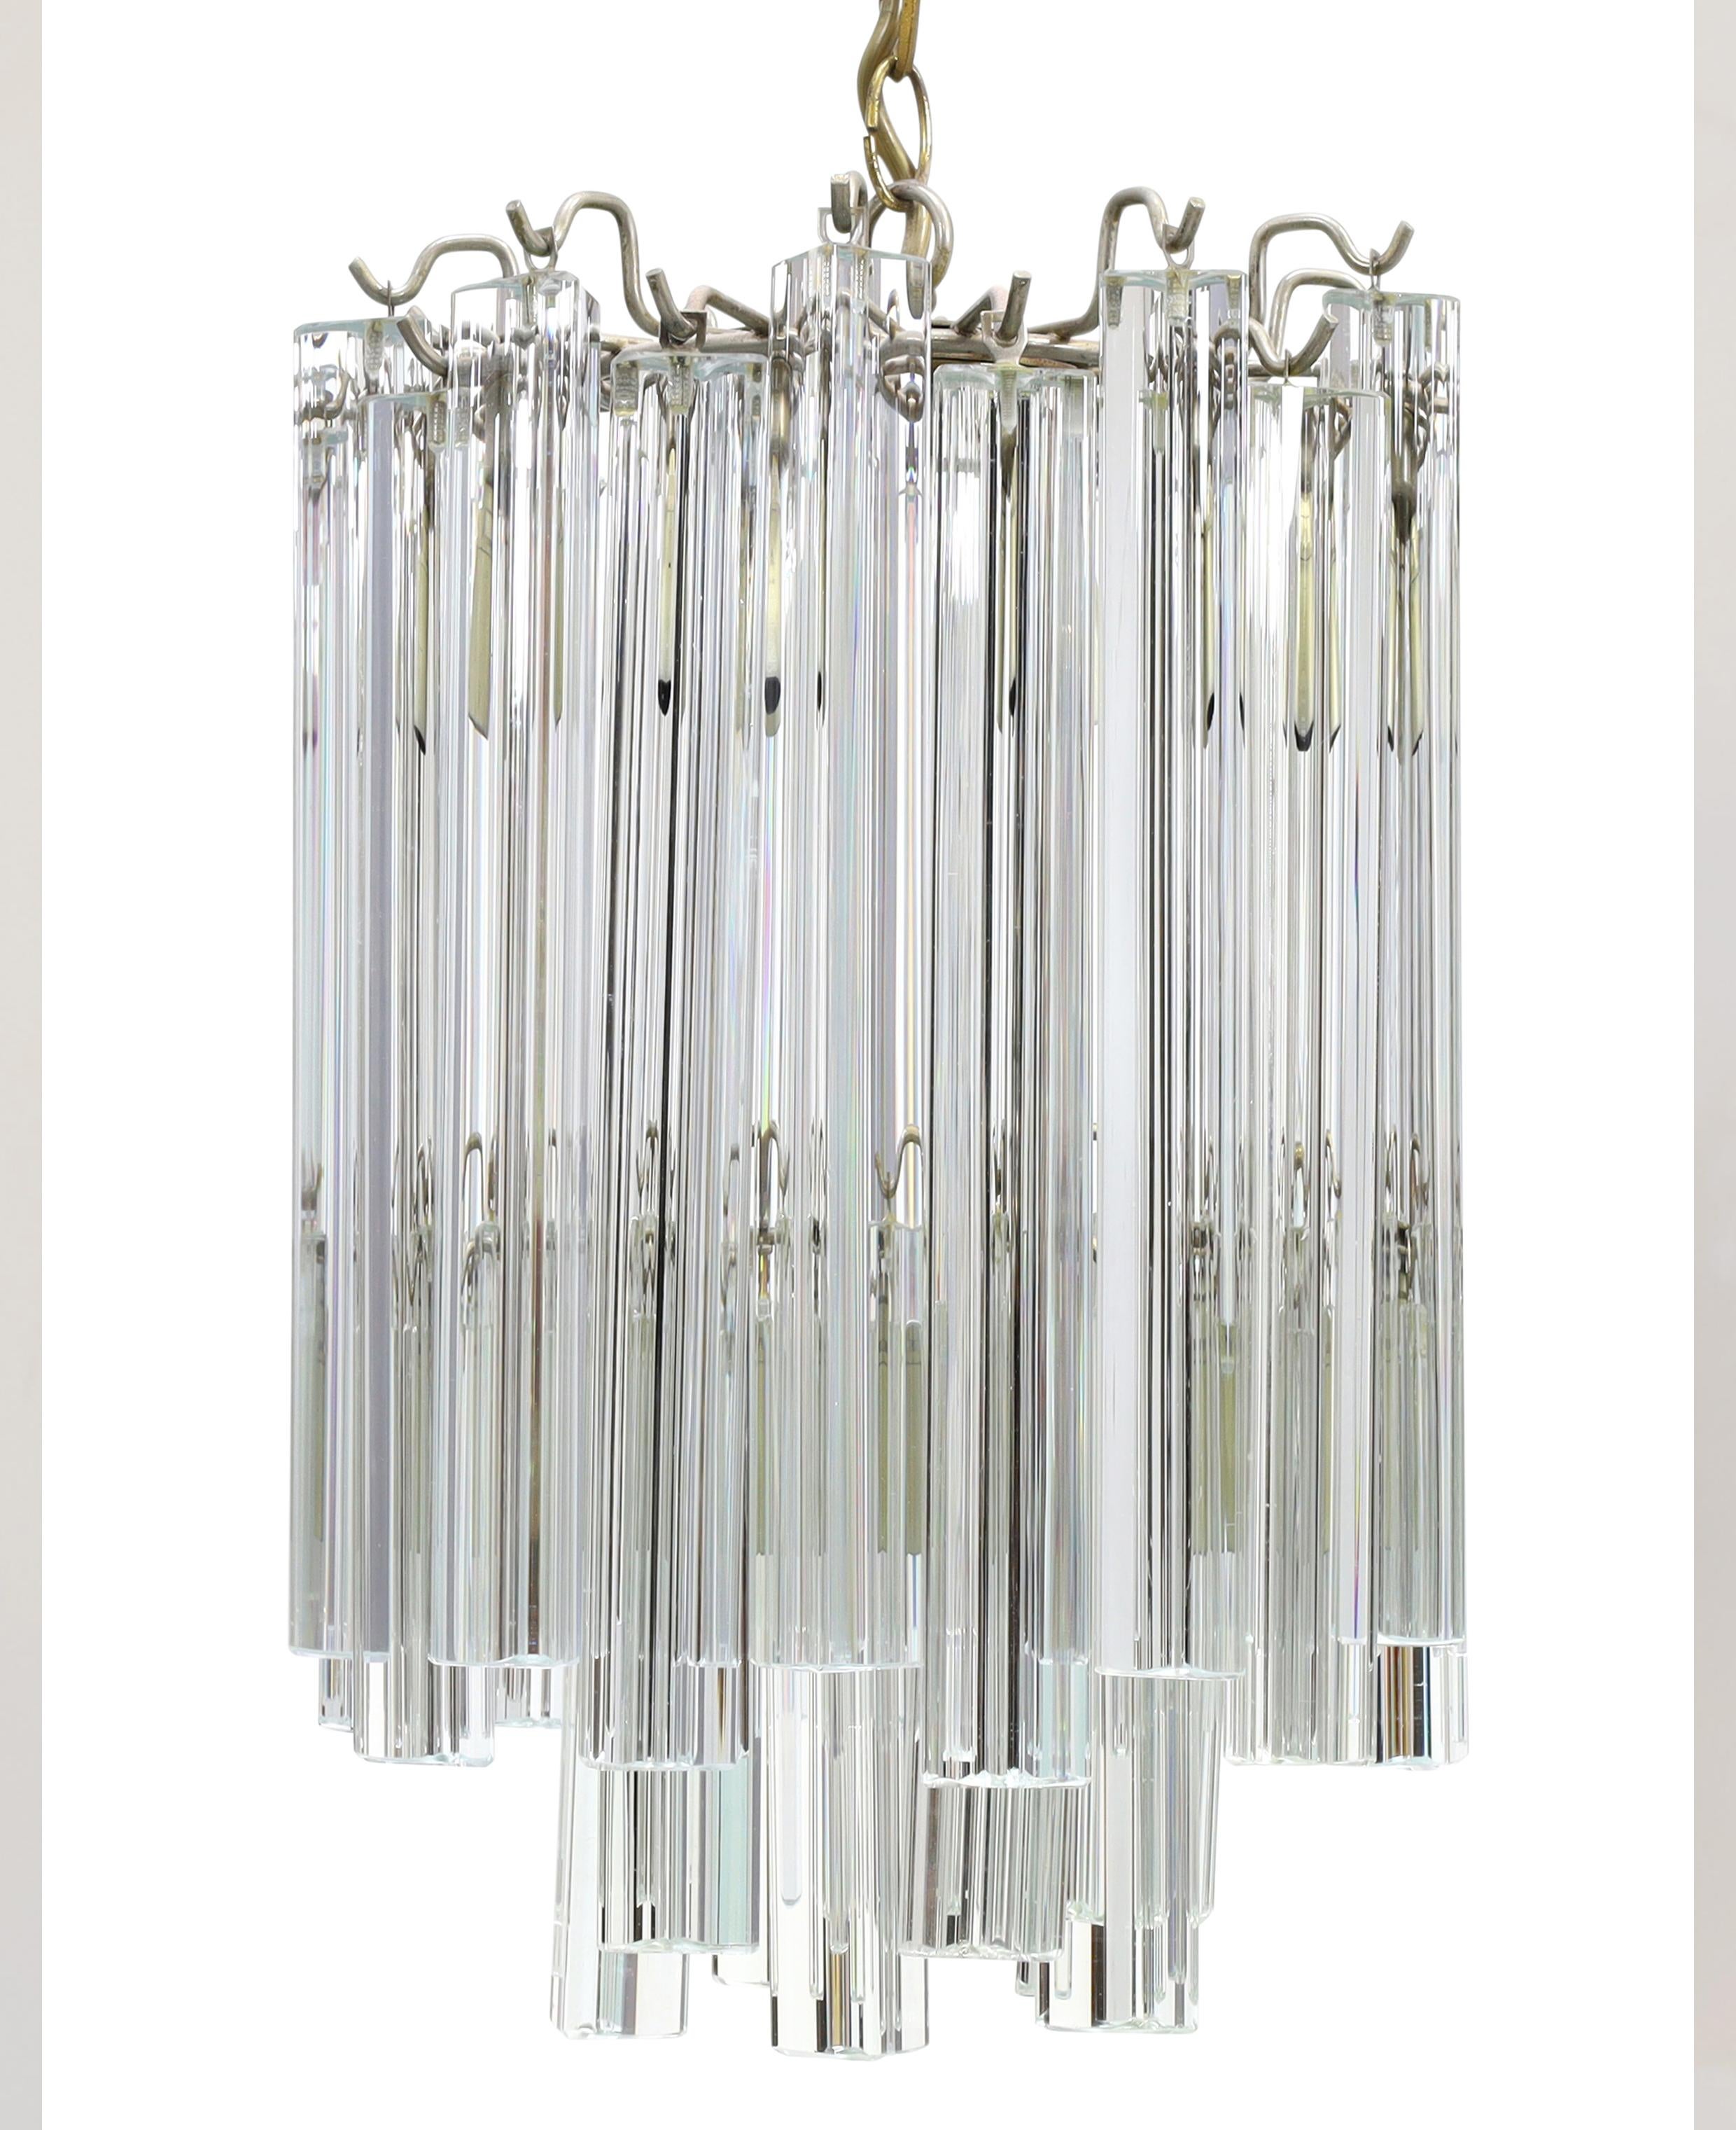 Venini Trilobo Murano glass and steel chandelier circa 1960 Made in Italy

Will require four chandelier bulbs. 

Venini—the world famous Italian glass company—traces it roots to 1921, when Paolo Venini (1895-1959), a Milan lawyer with